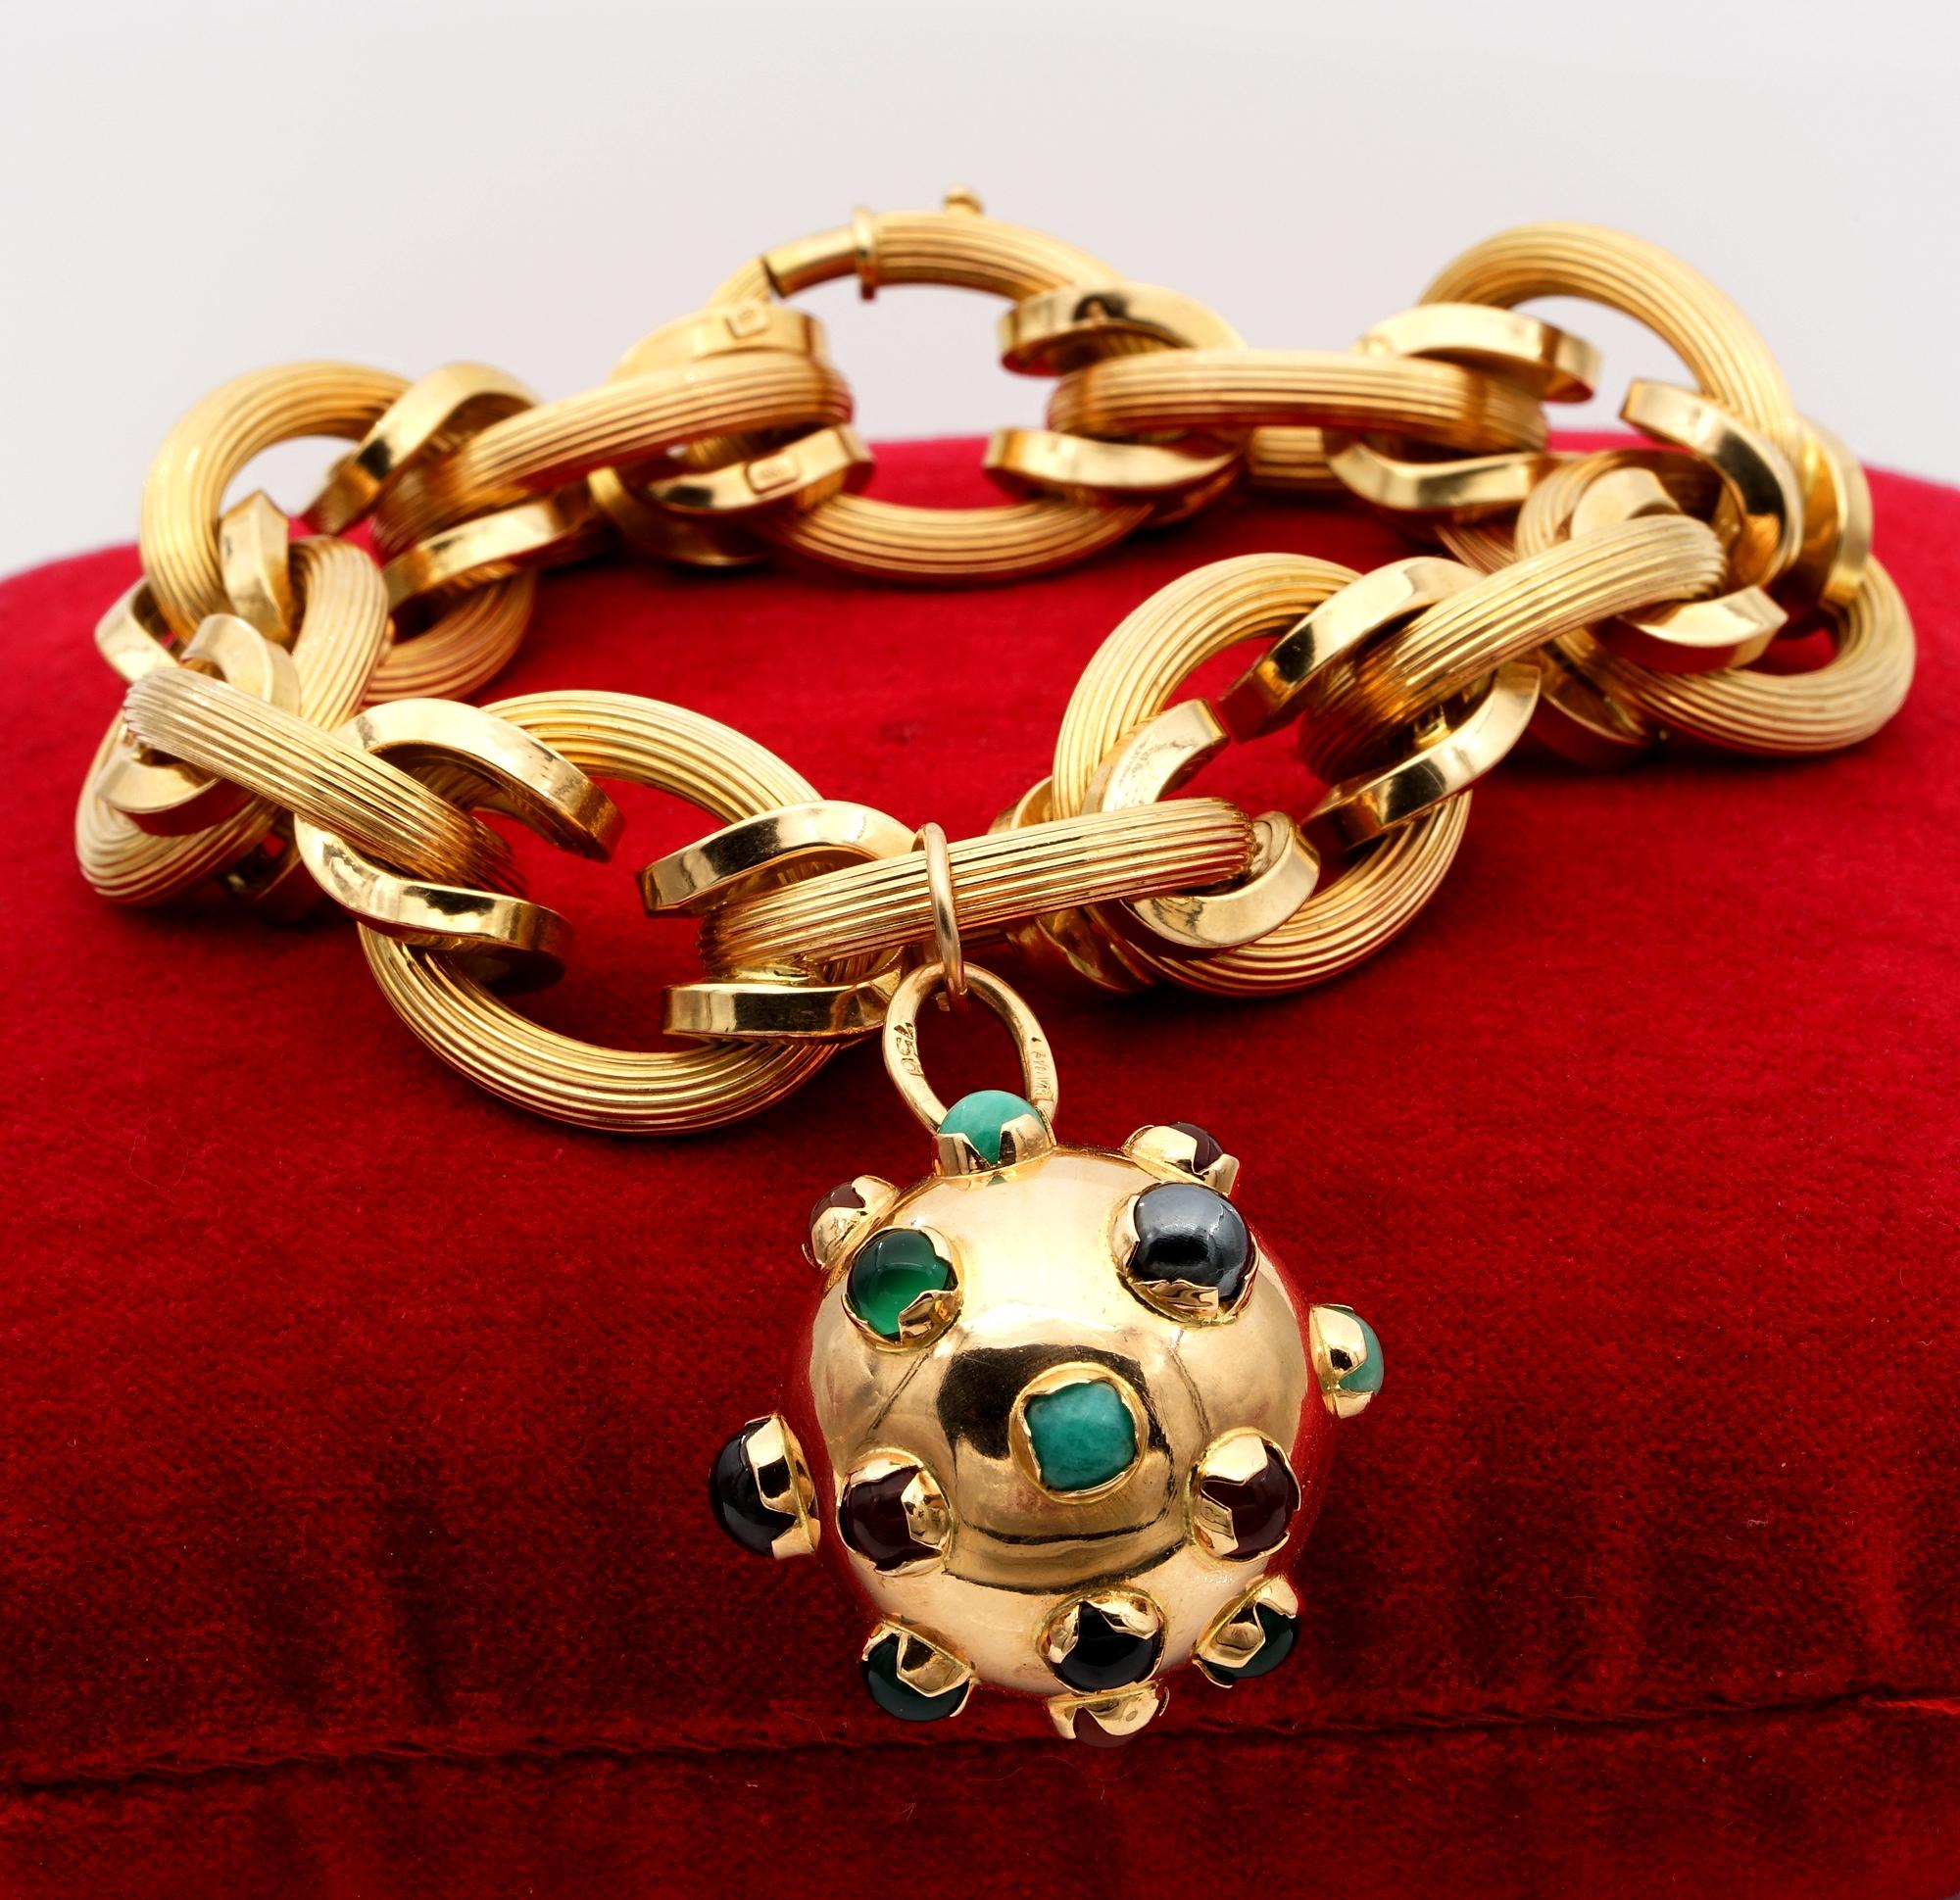 The Very best For Charms

A stylish 18 ct yellow gold bracelet by Italian Goldsmith Craftsmanship, c.1960
Designed as a straight row of highly articulated openwork oval shaped links with piped profile alternated polished gold links creating enormous